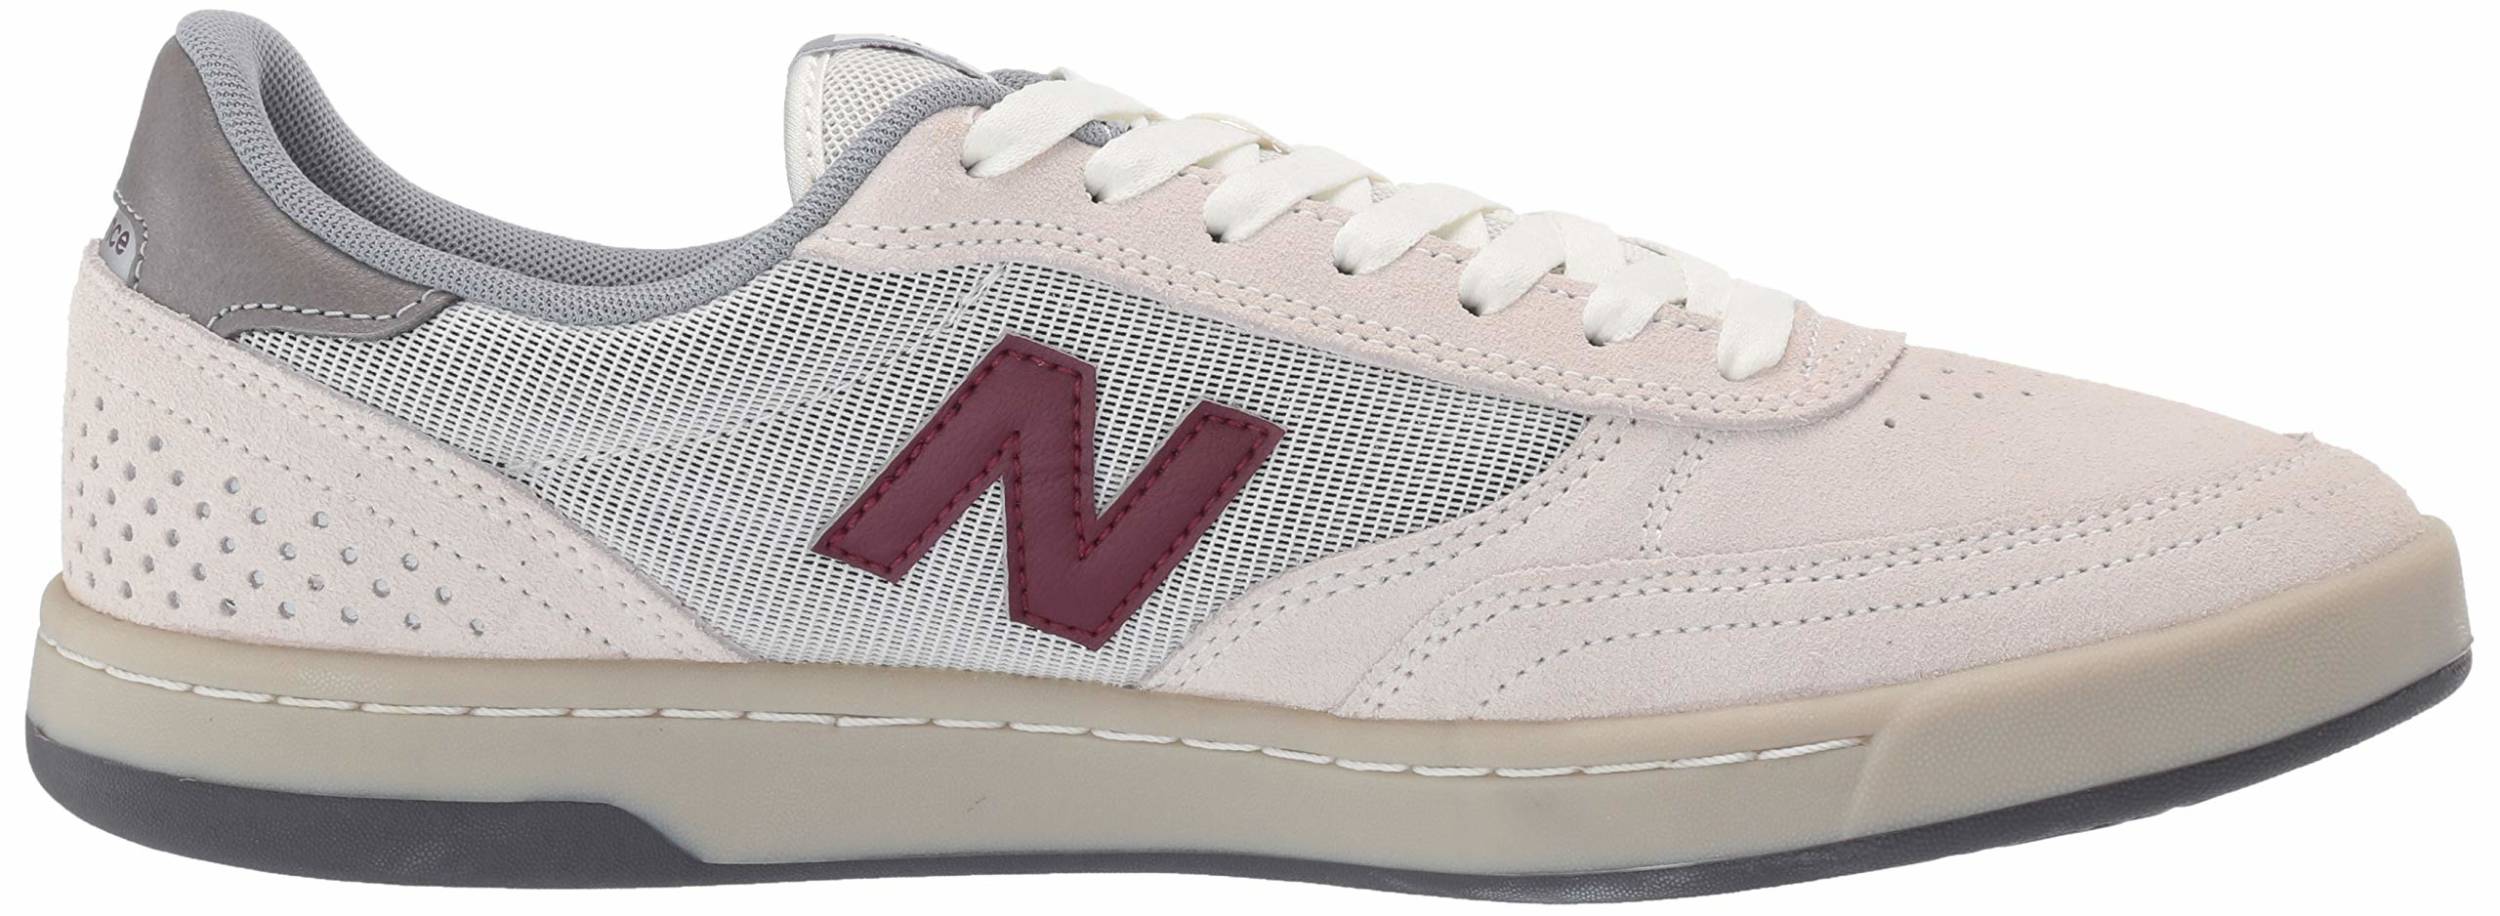 New Balance 440 sneakers in 5 colors 